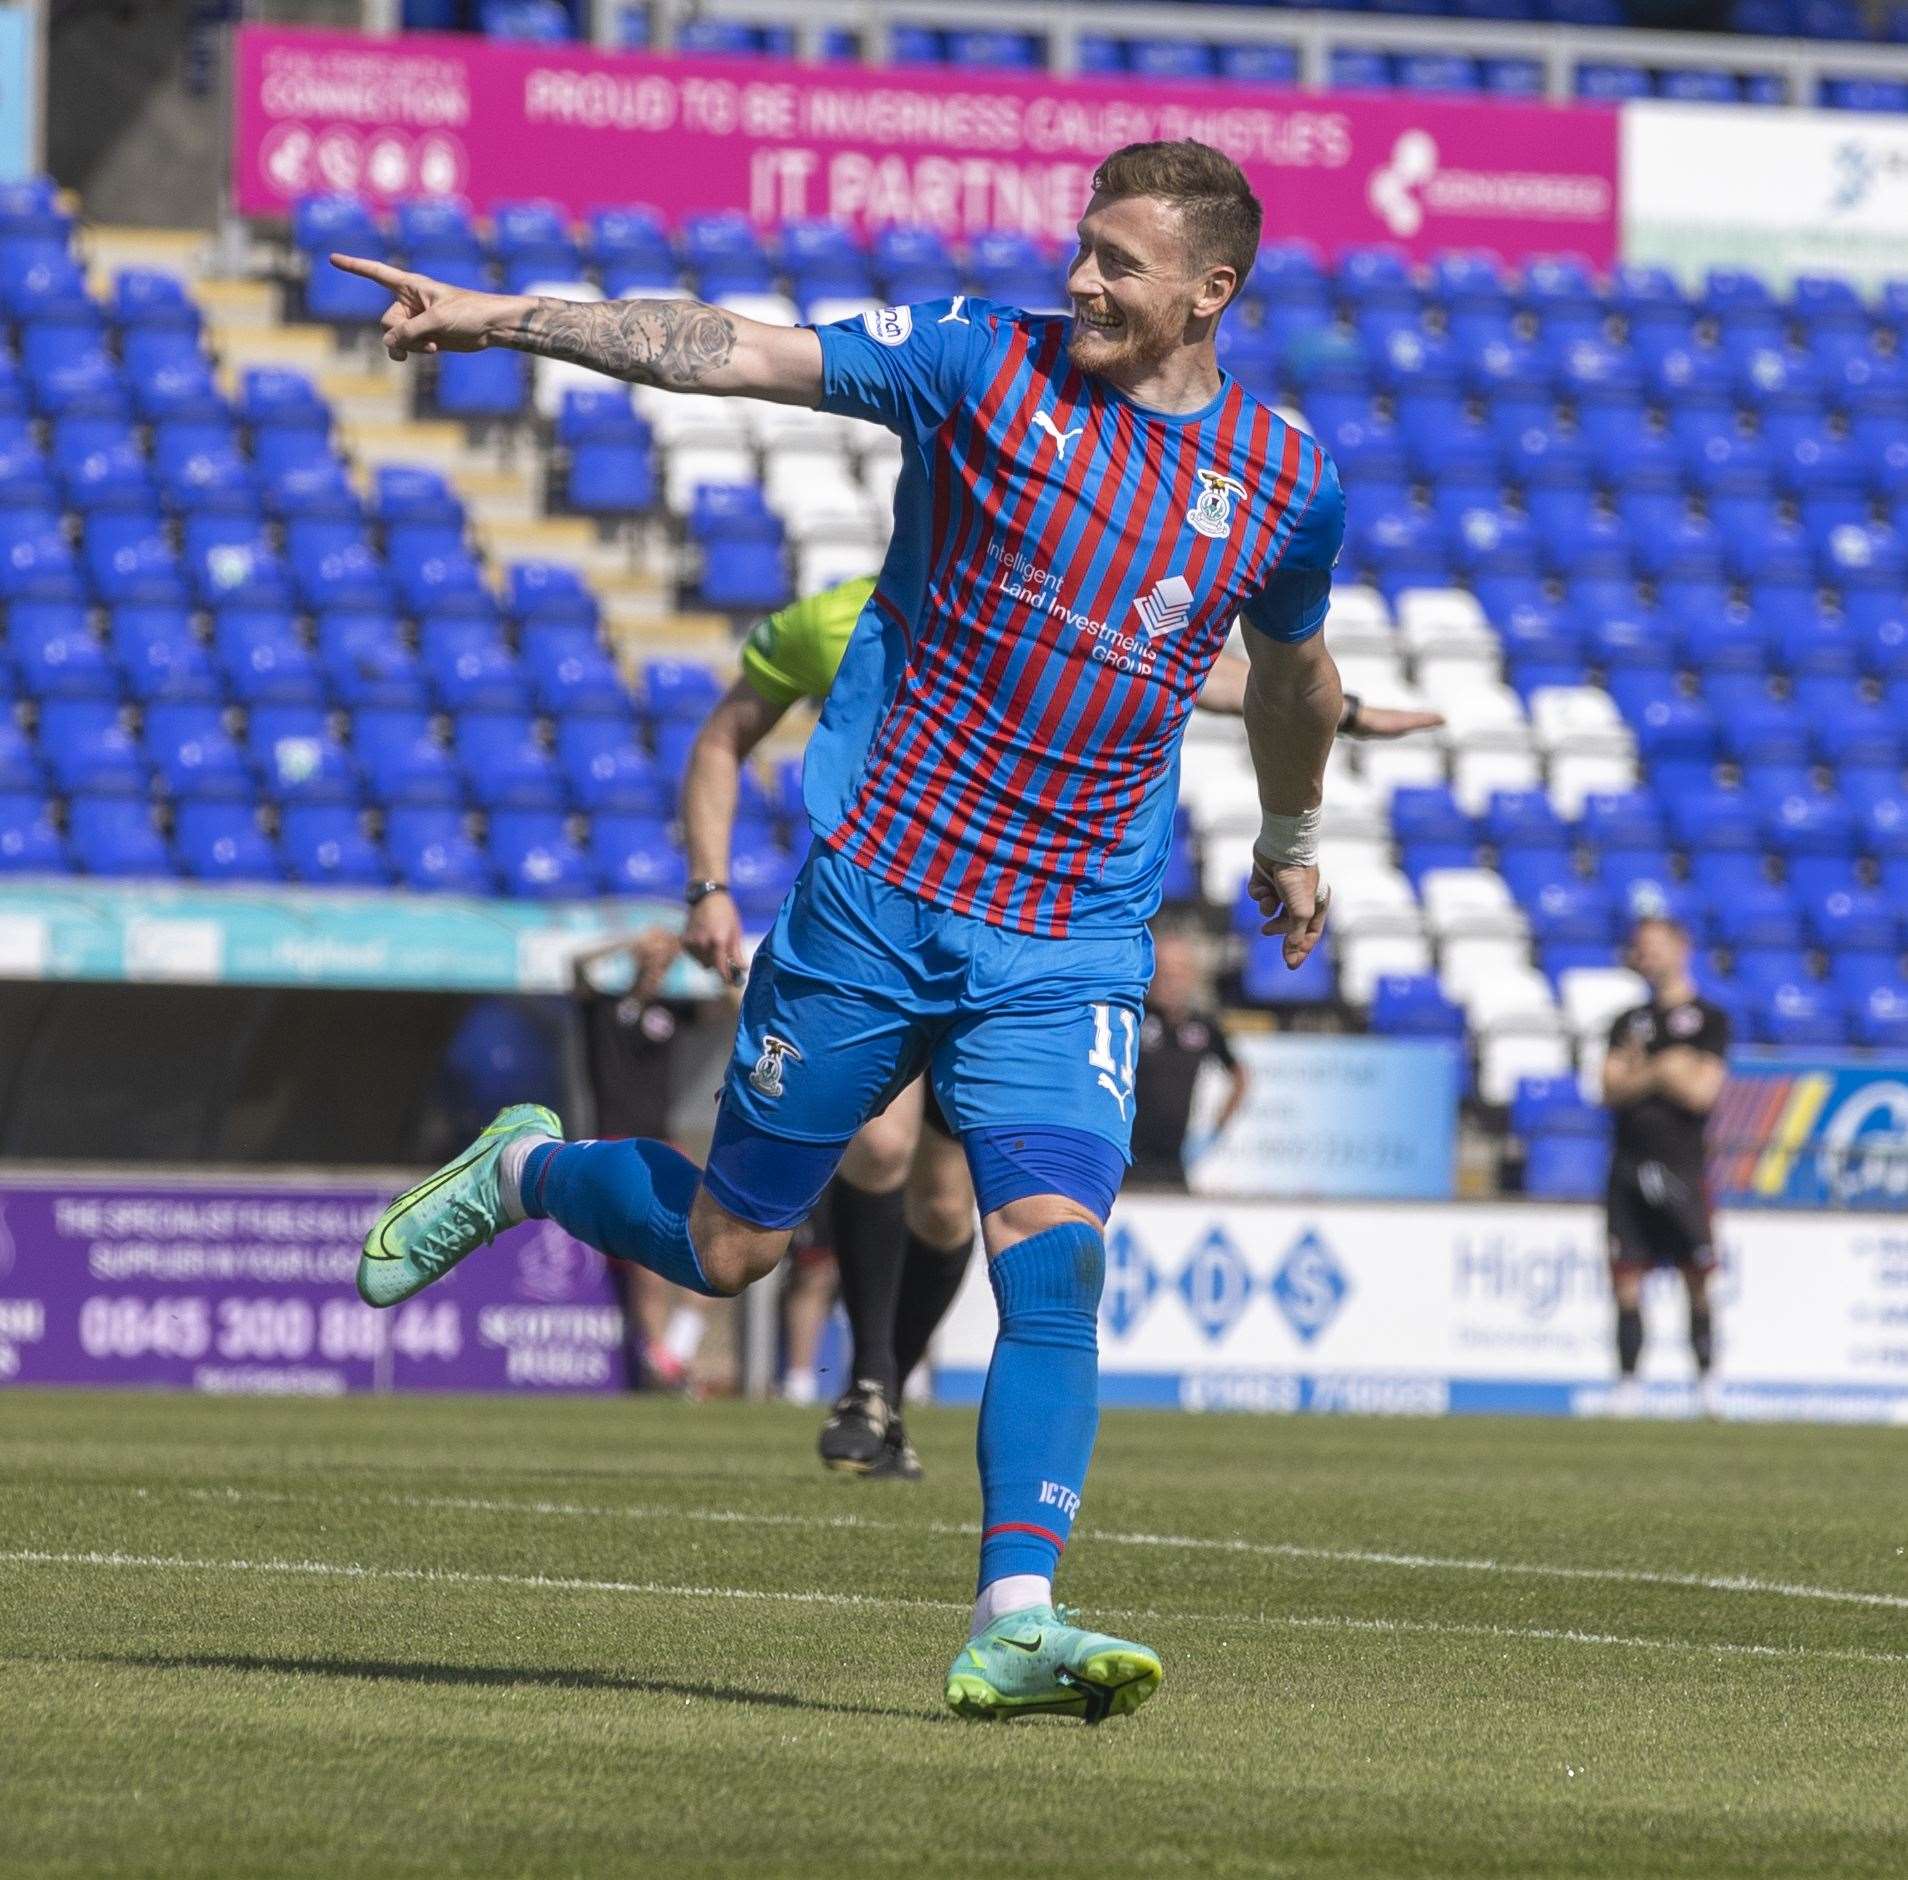 Shane Sutherland scored Caley Thistle's first league goal of the season.